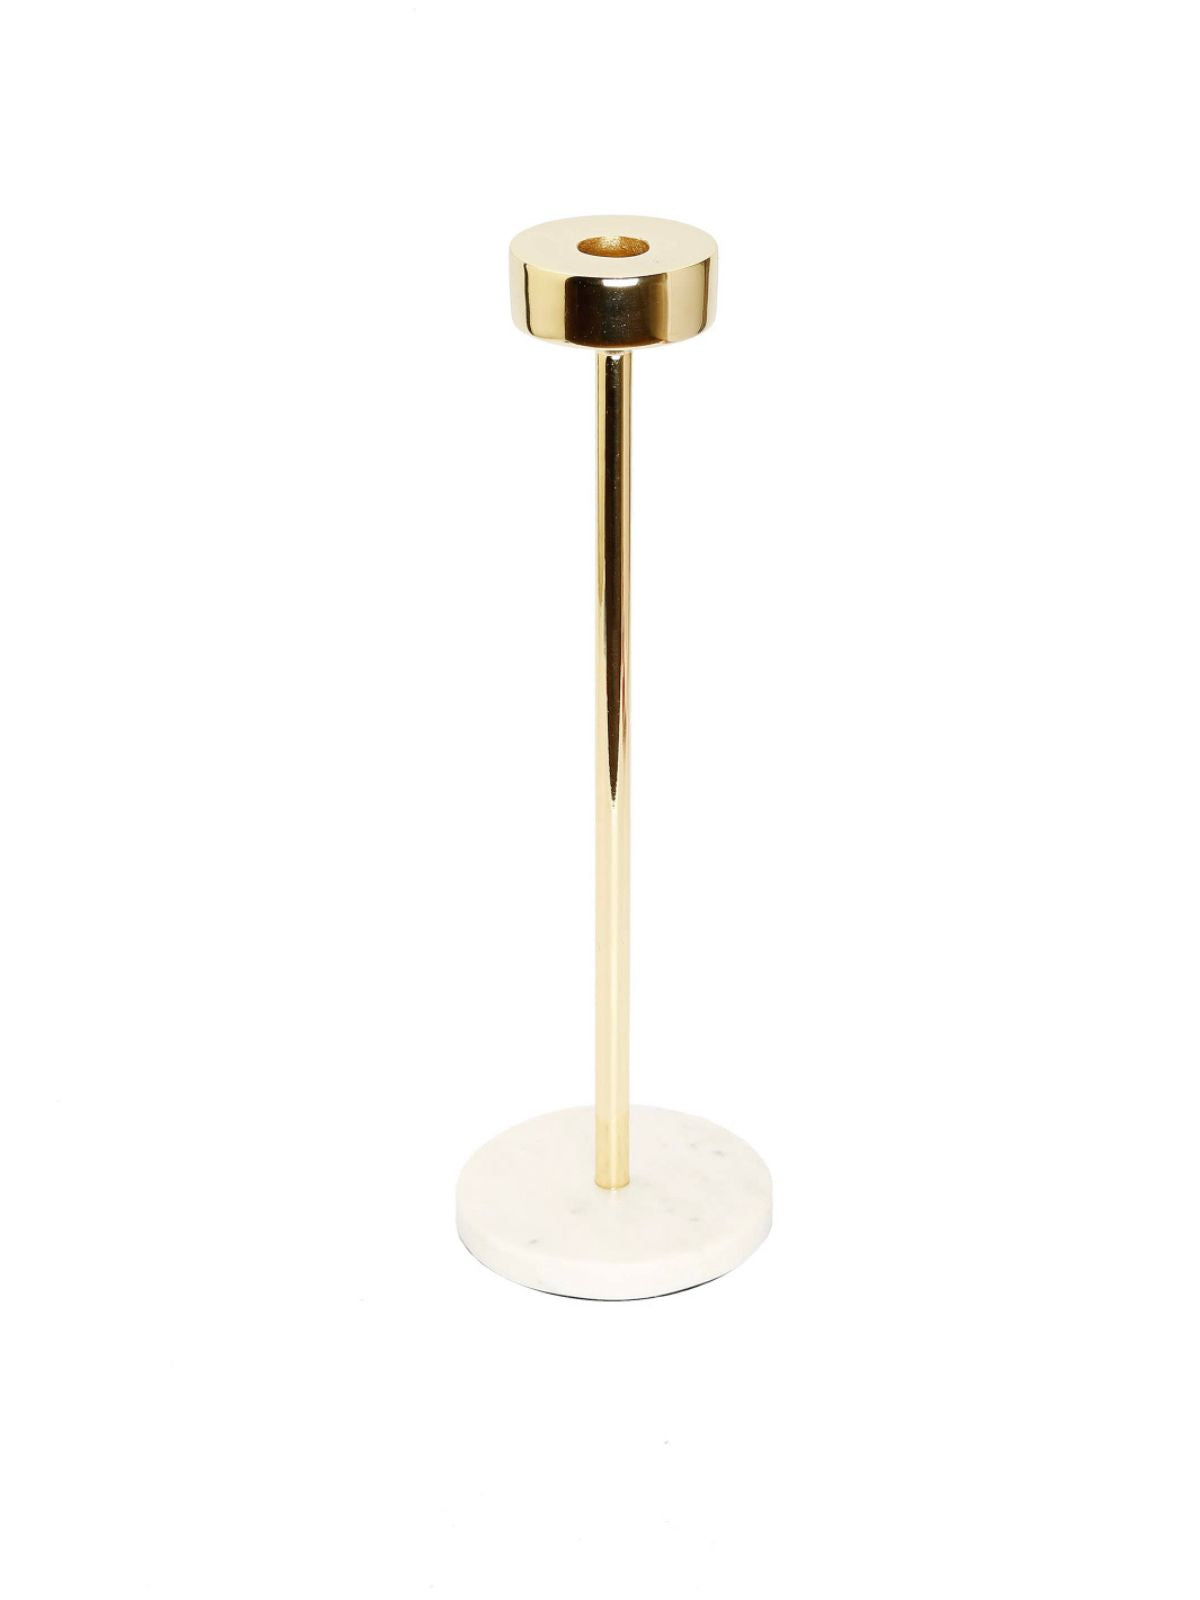 14H Gold Taper Candle Holder on Marble Base. Sold by KYA Home Decor.